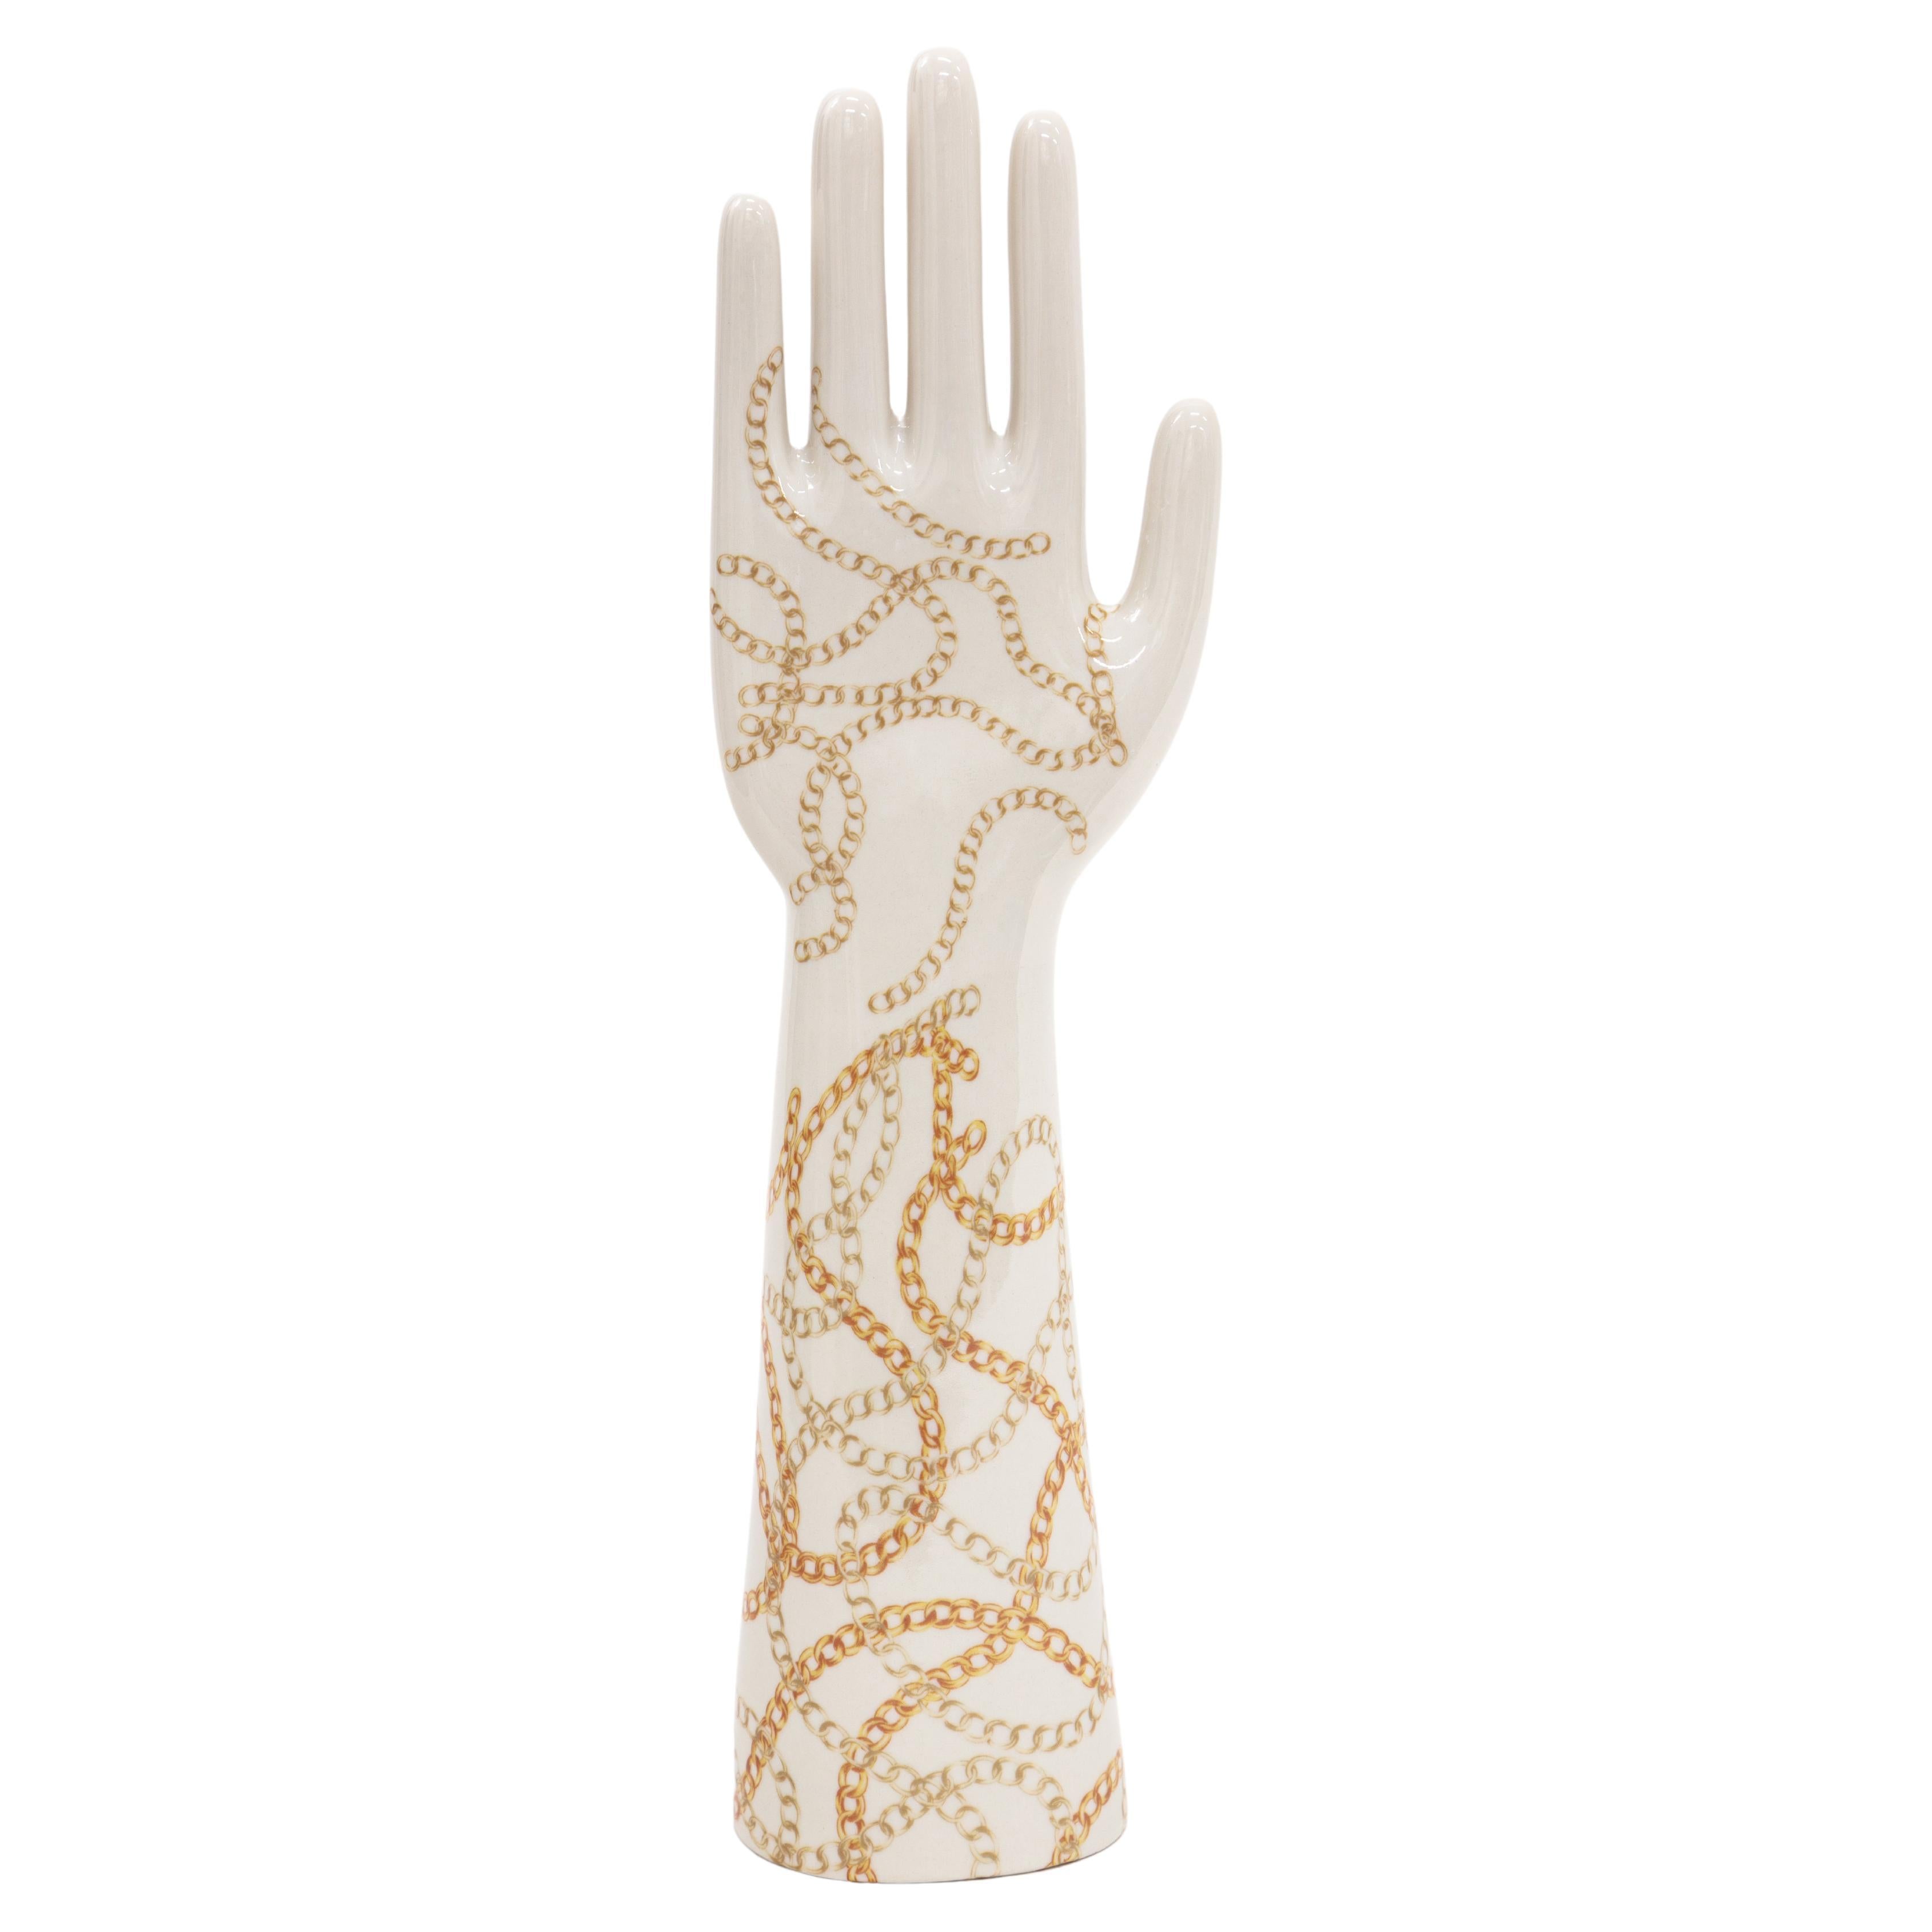 Anatomica, Porcelain Hand with chains Decoration by Vito Nesta For Sale